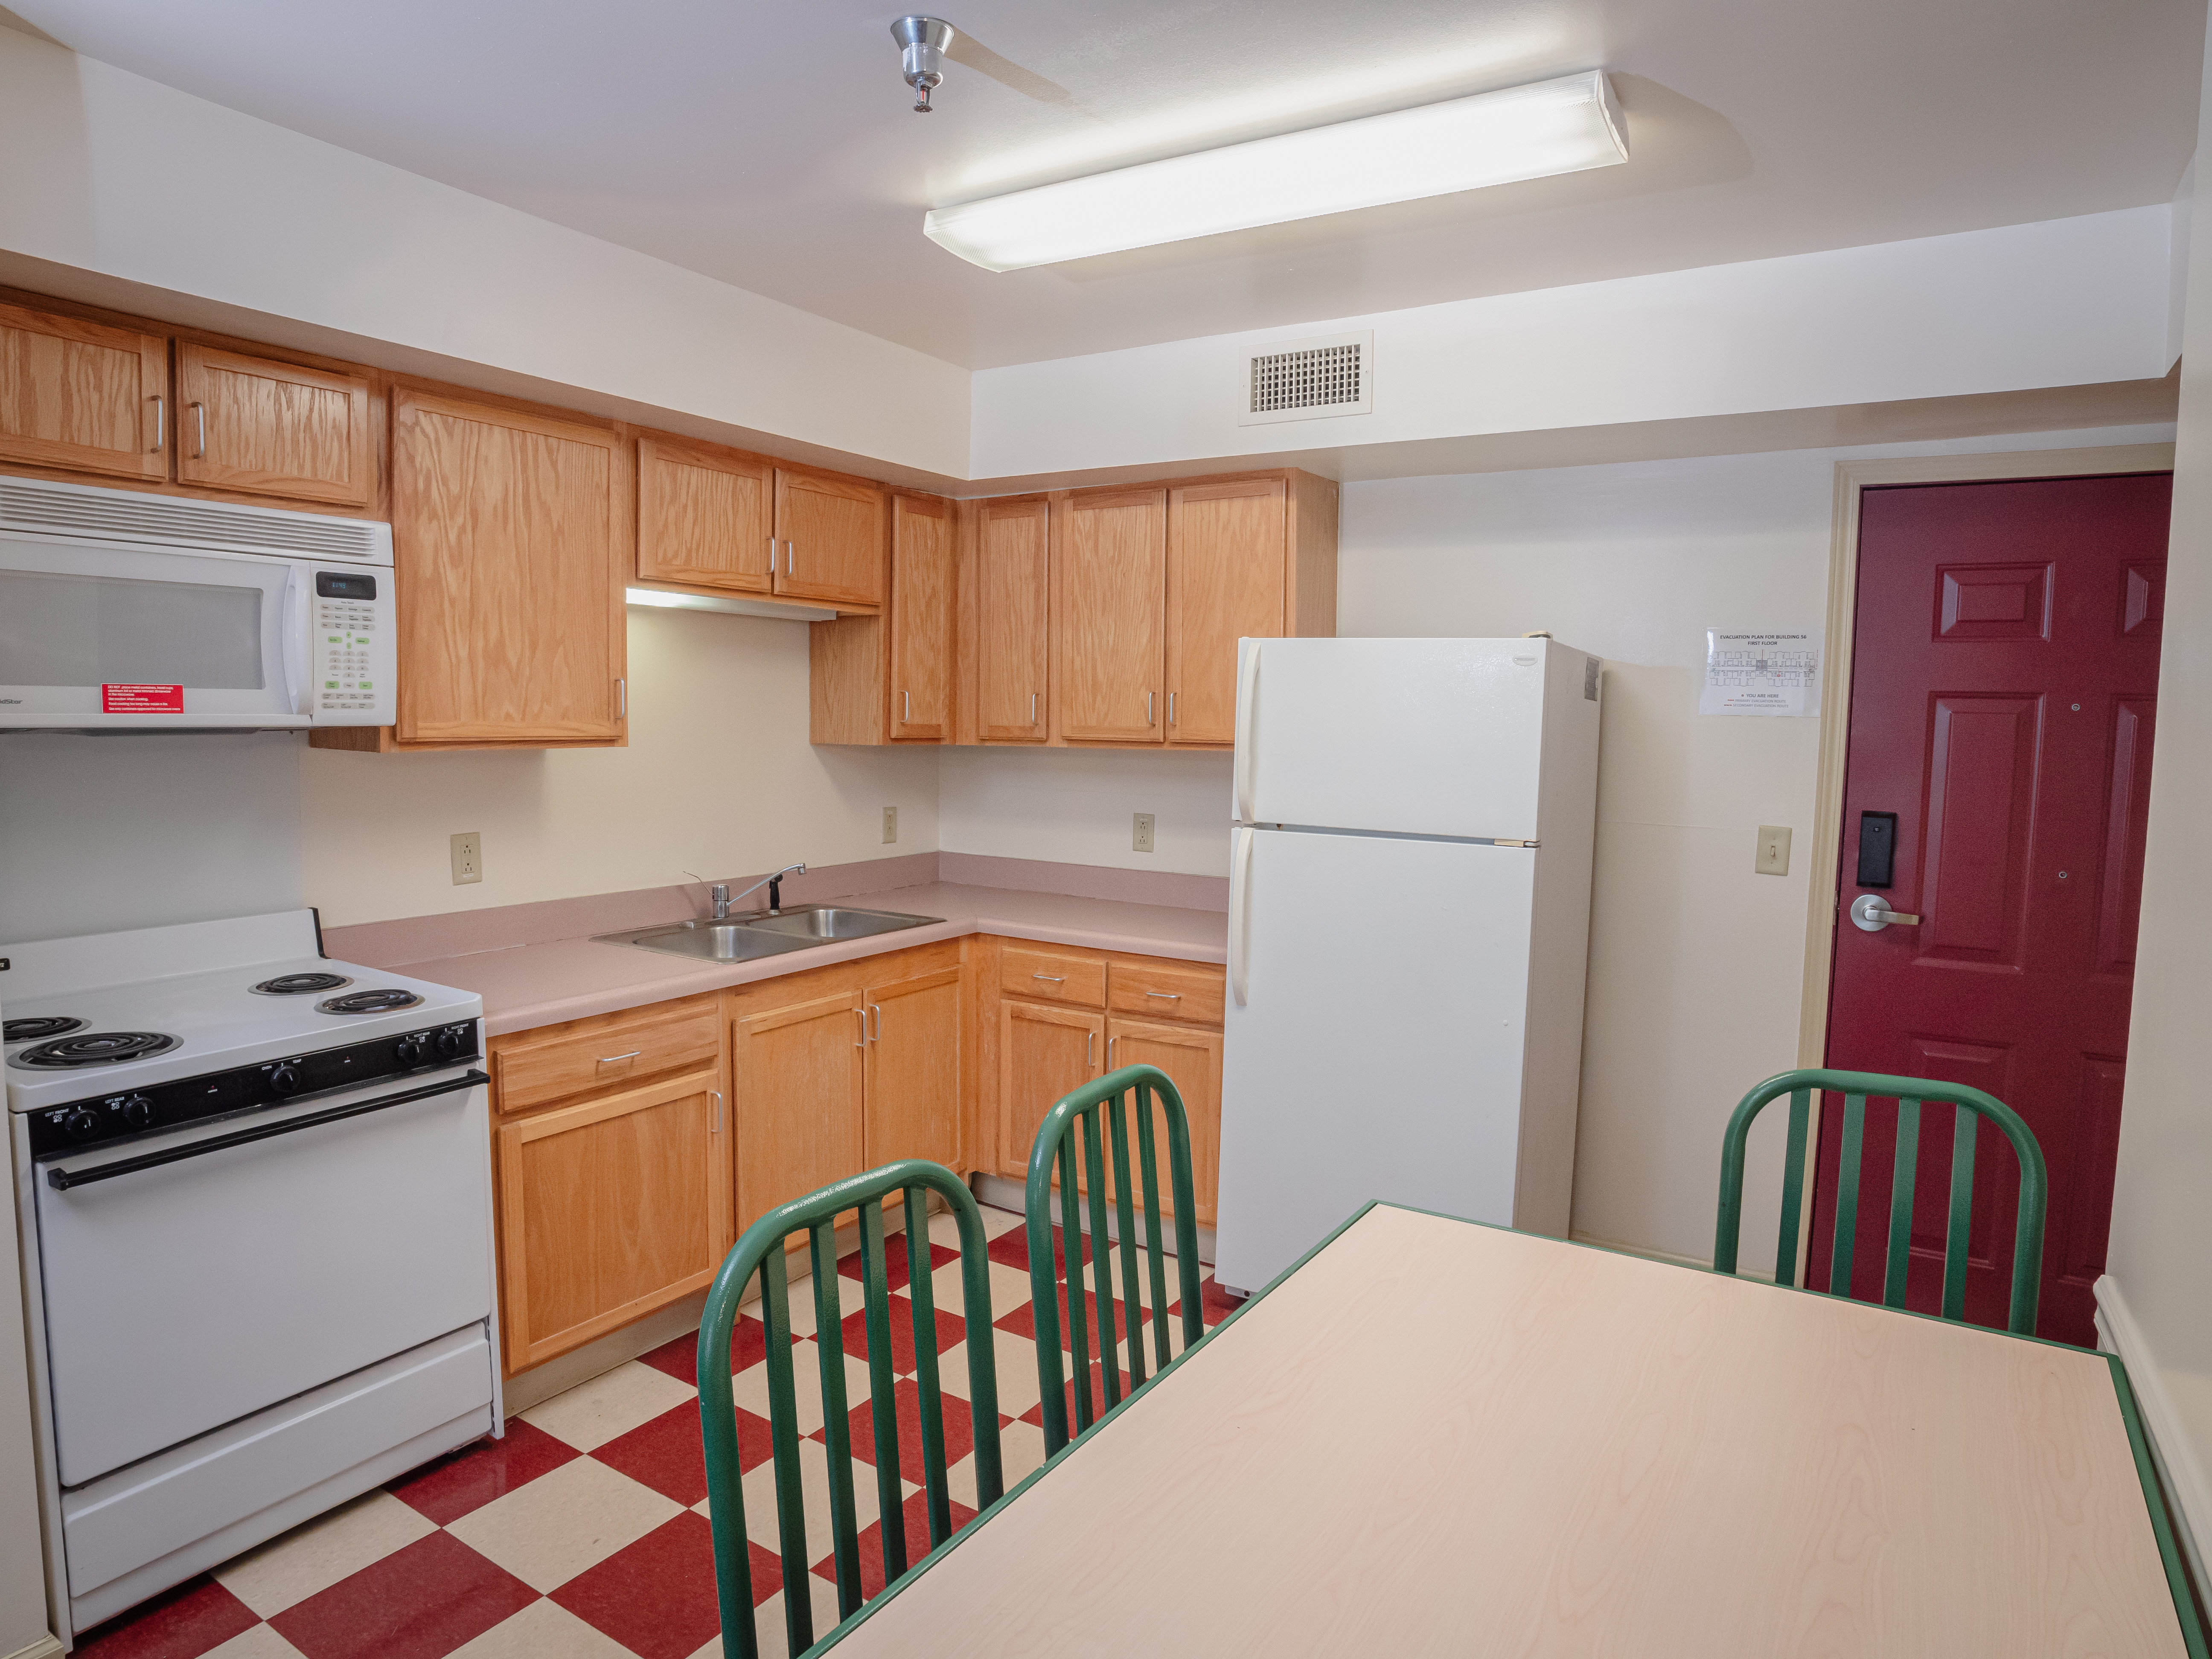 Picture of Campus Apartment kitchen.